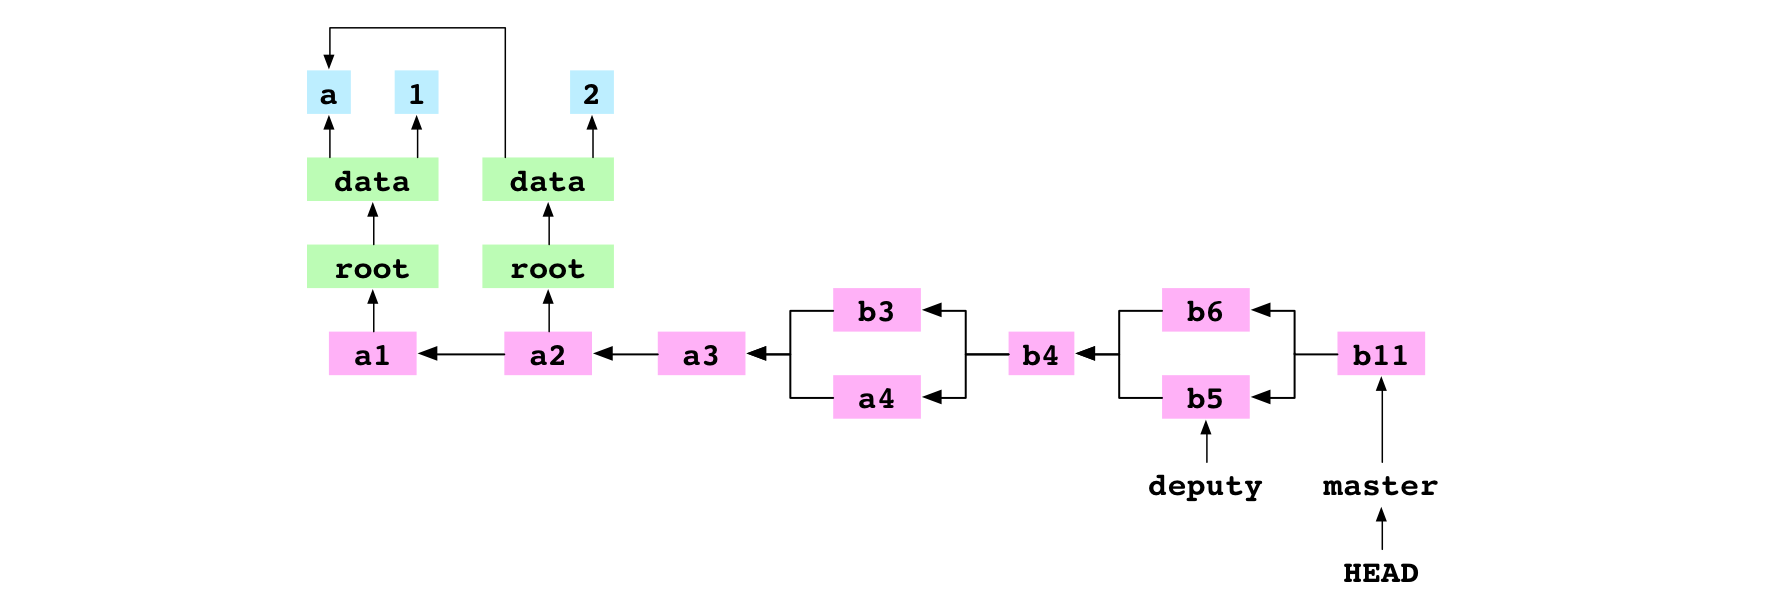 b11, the merge commit resulting from the conflicted, recursive merge of b5 into b6